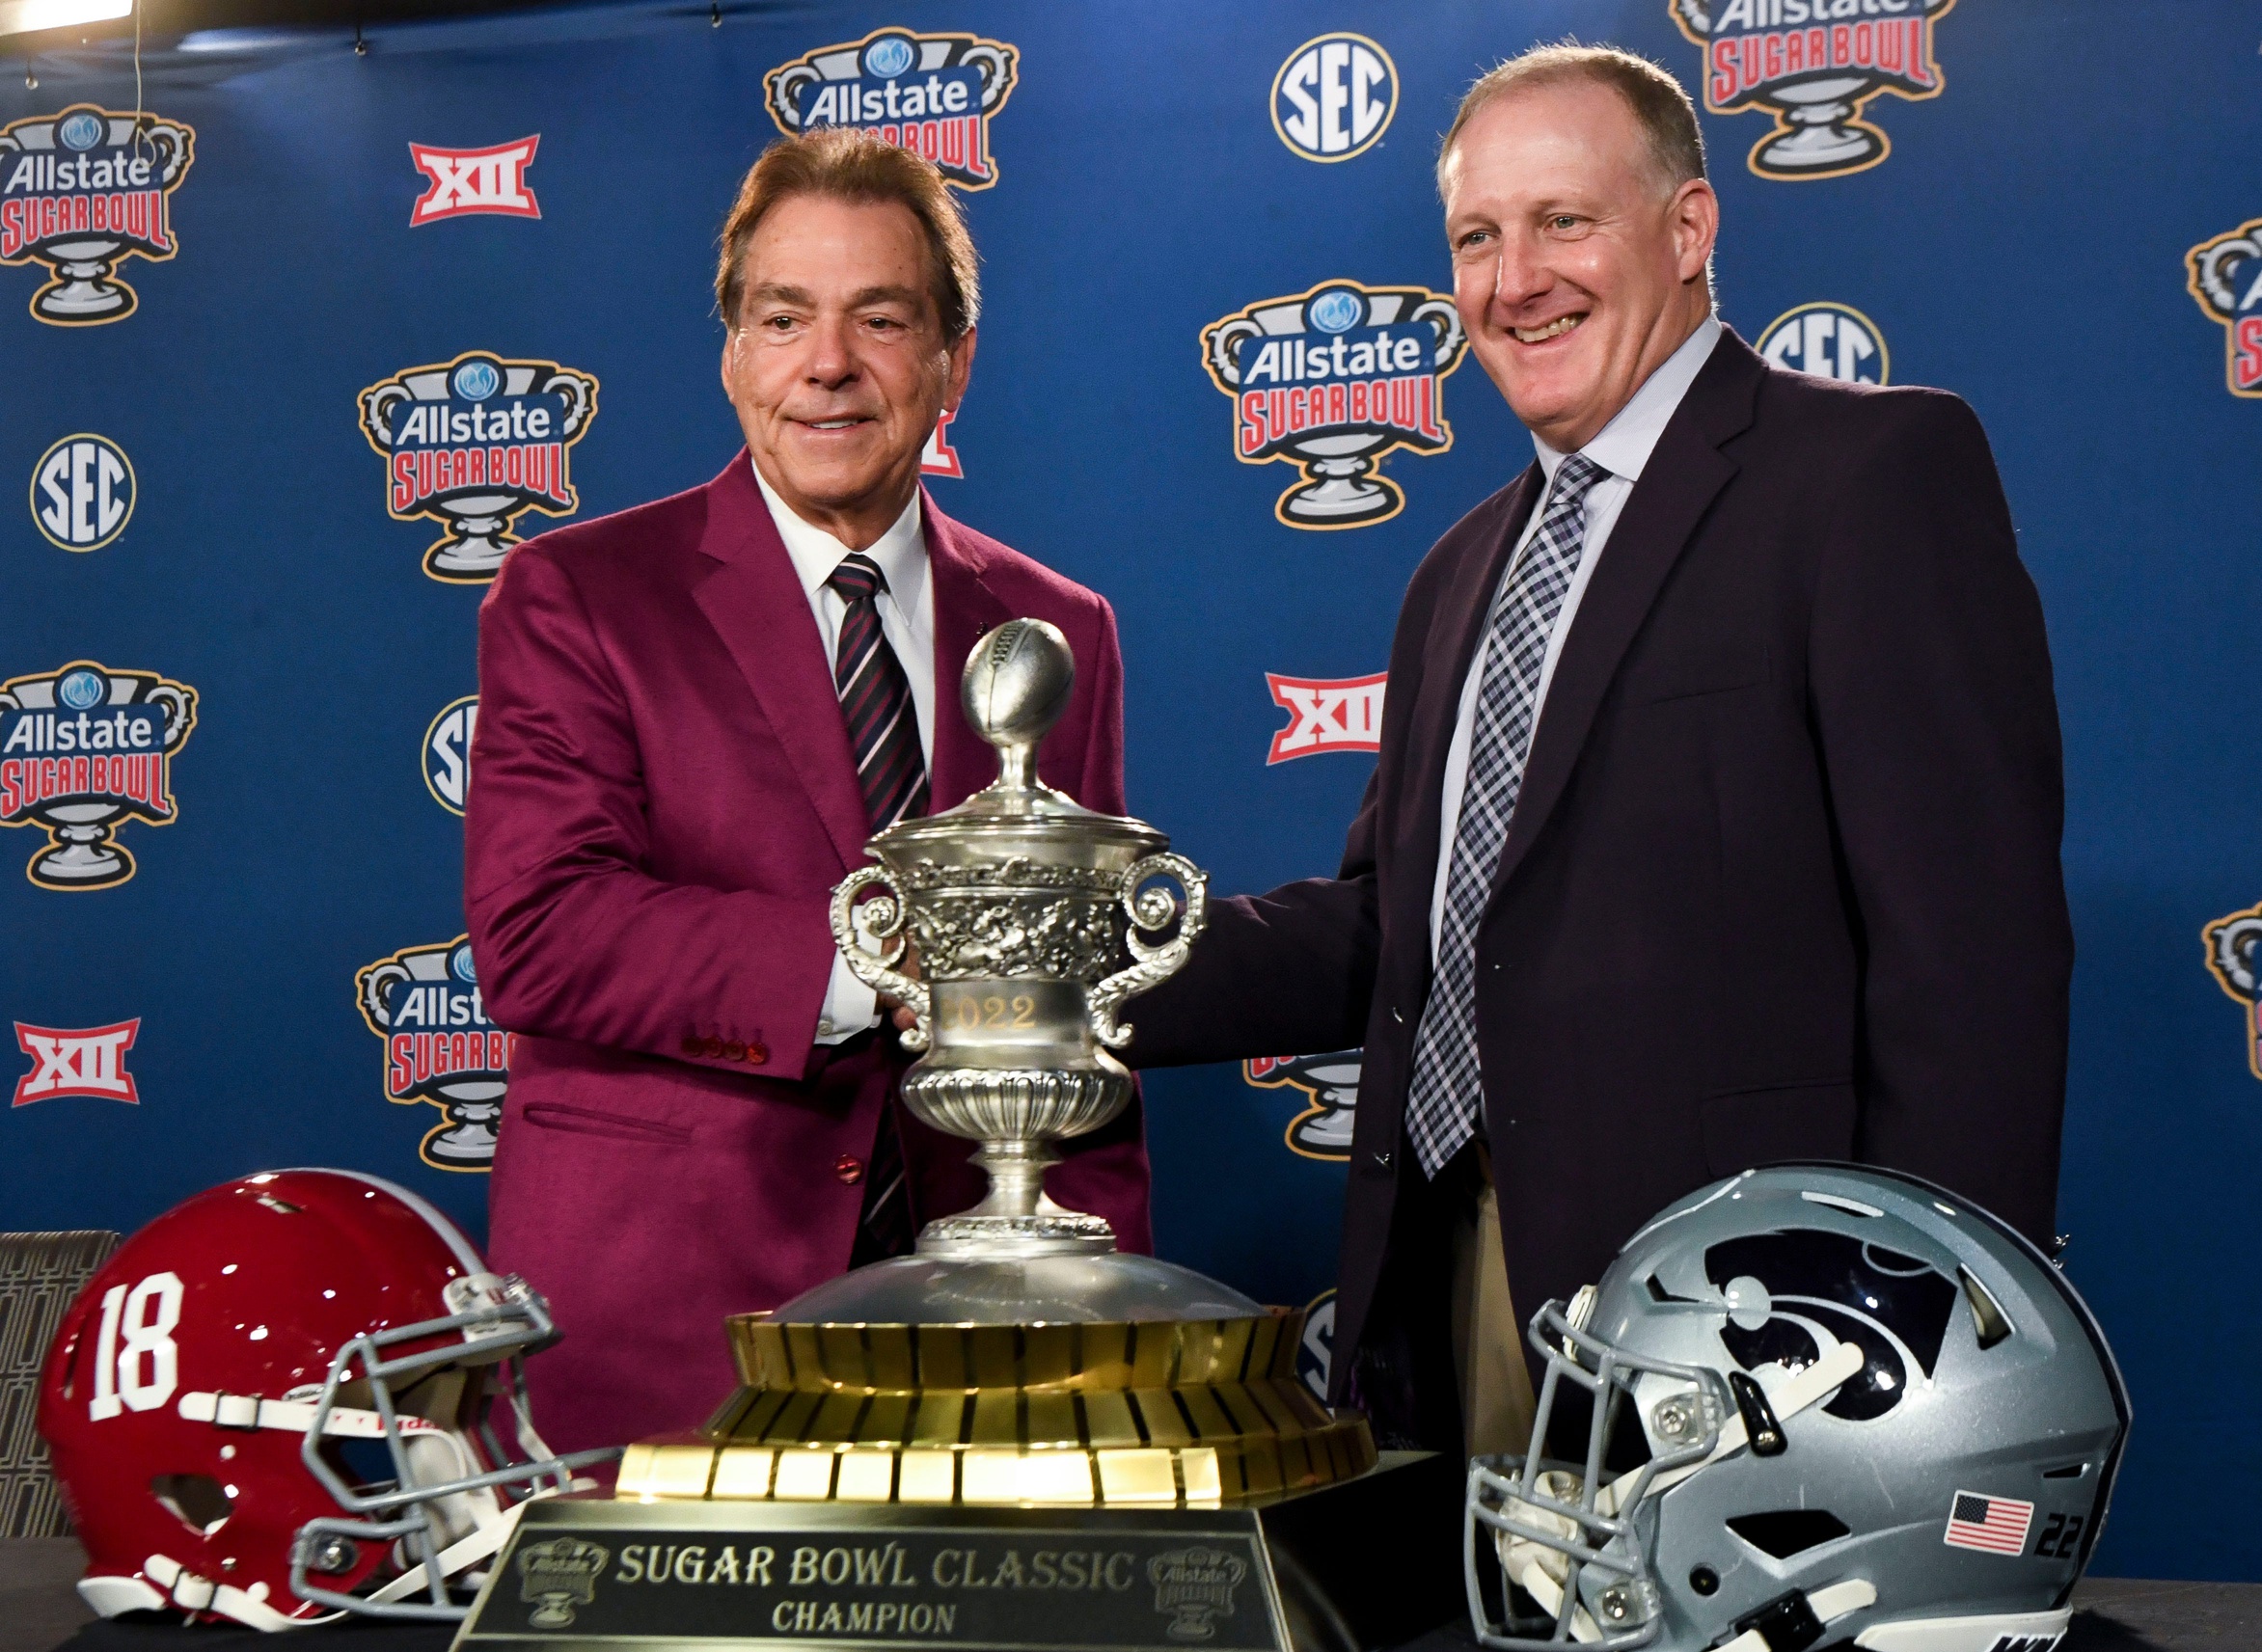 College Football: Ranking the top 25 head coaches | College